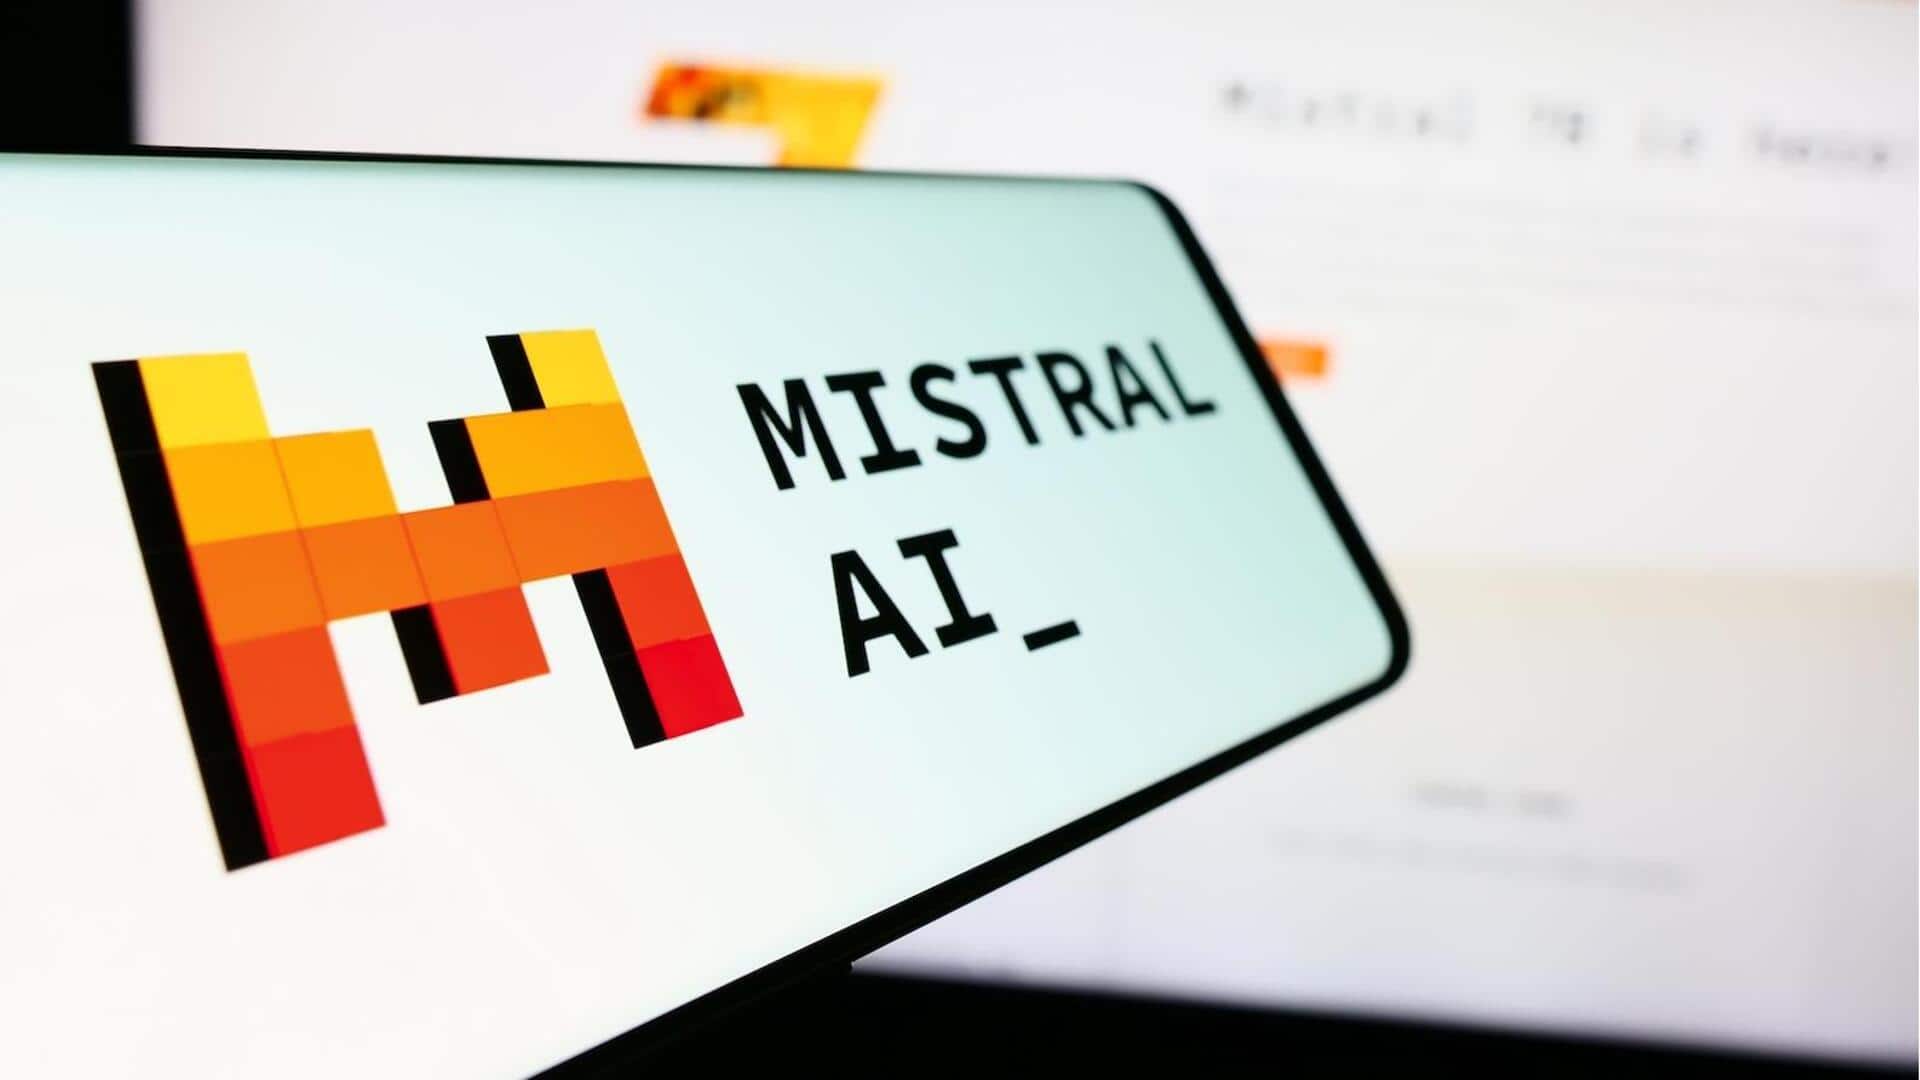 French AI startup Mistral secures $640M funding at $6B valuation